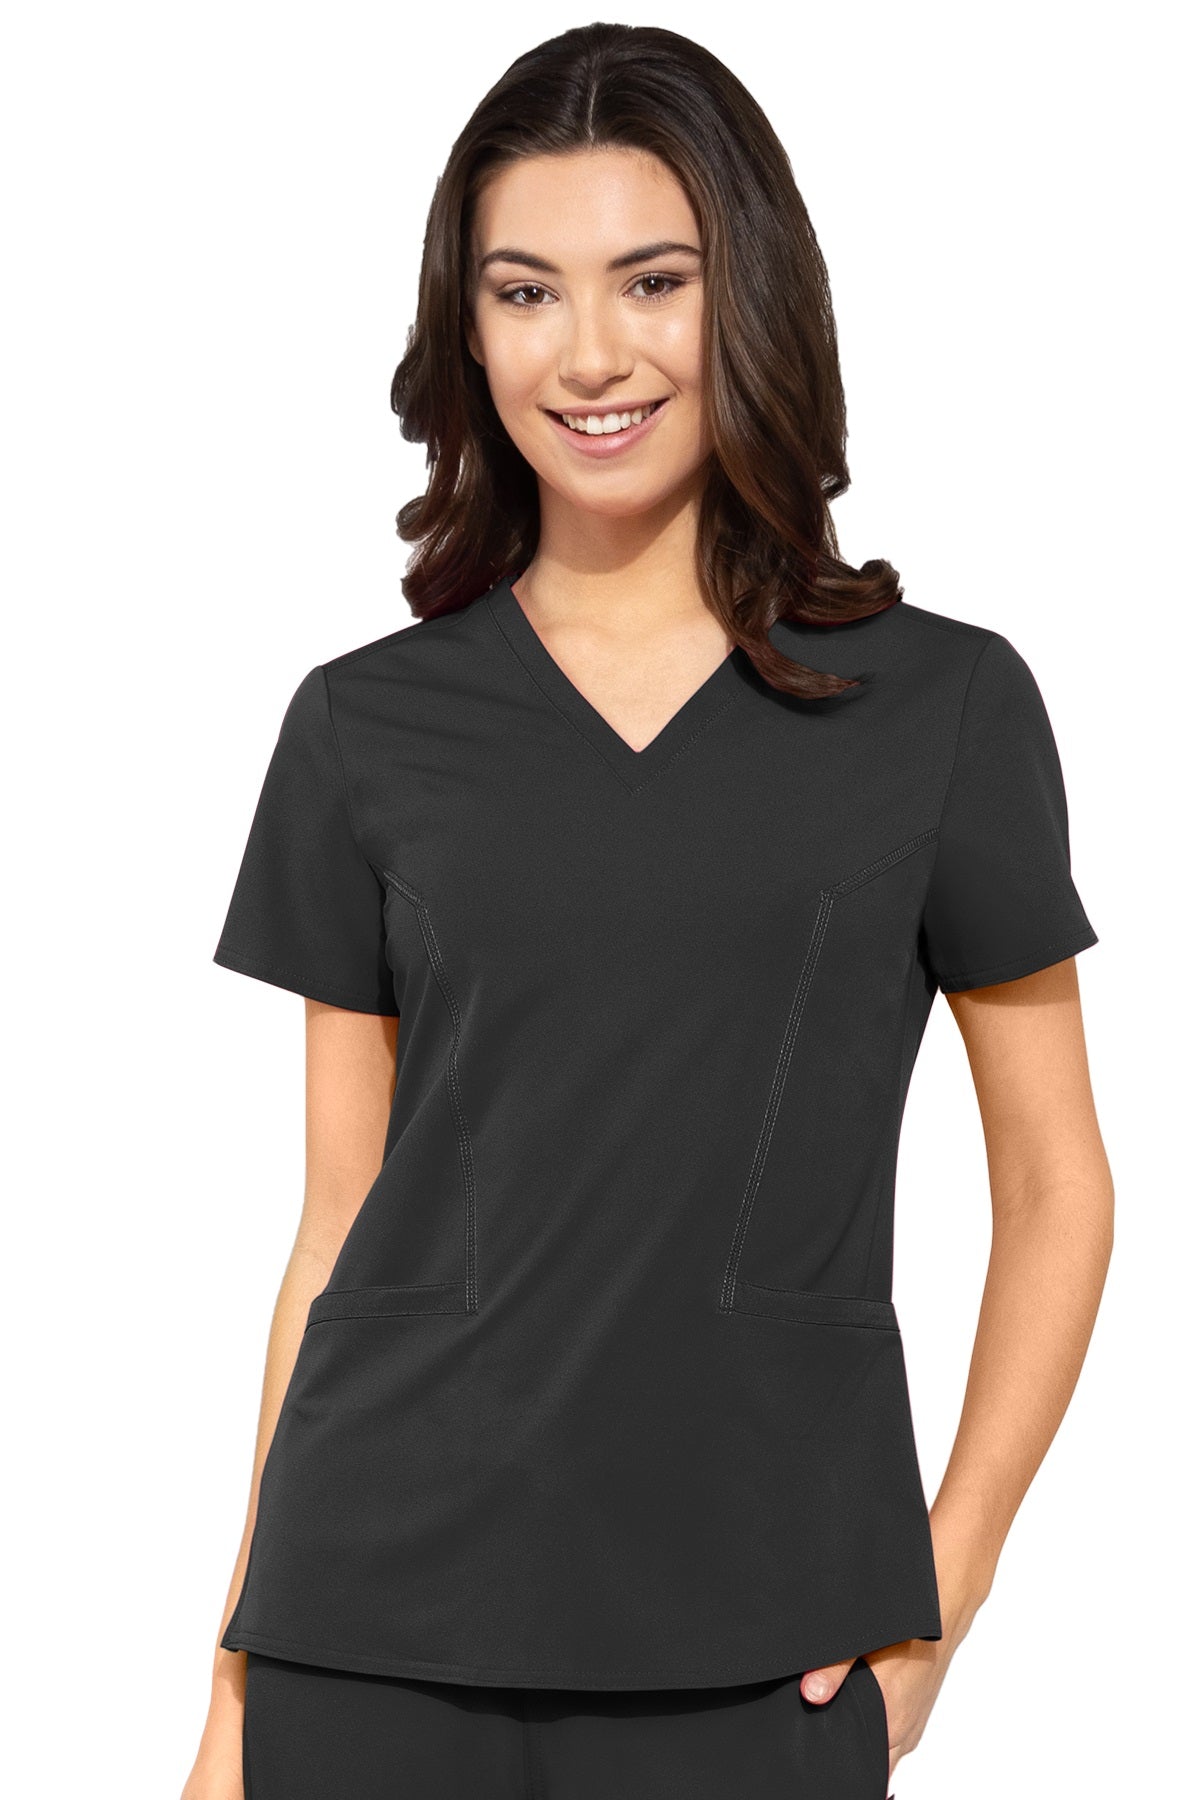 Med Couture Scrub Top Peaches Double V-Neck in Black at Parker's Clothing and Shoes